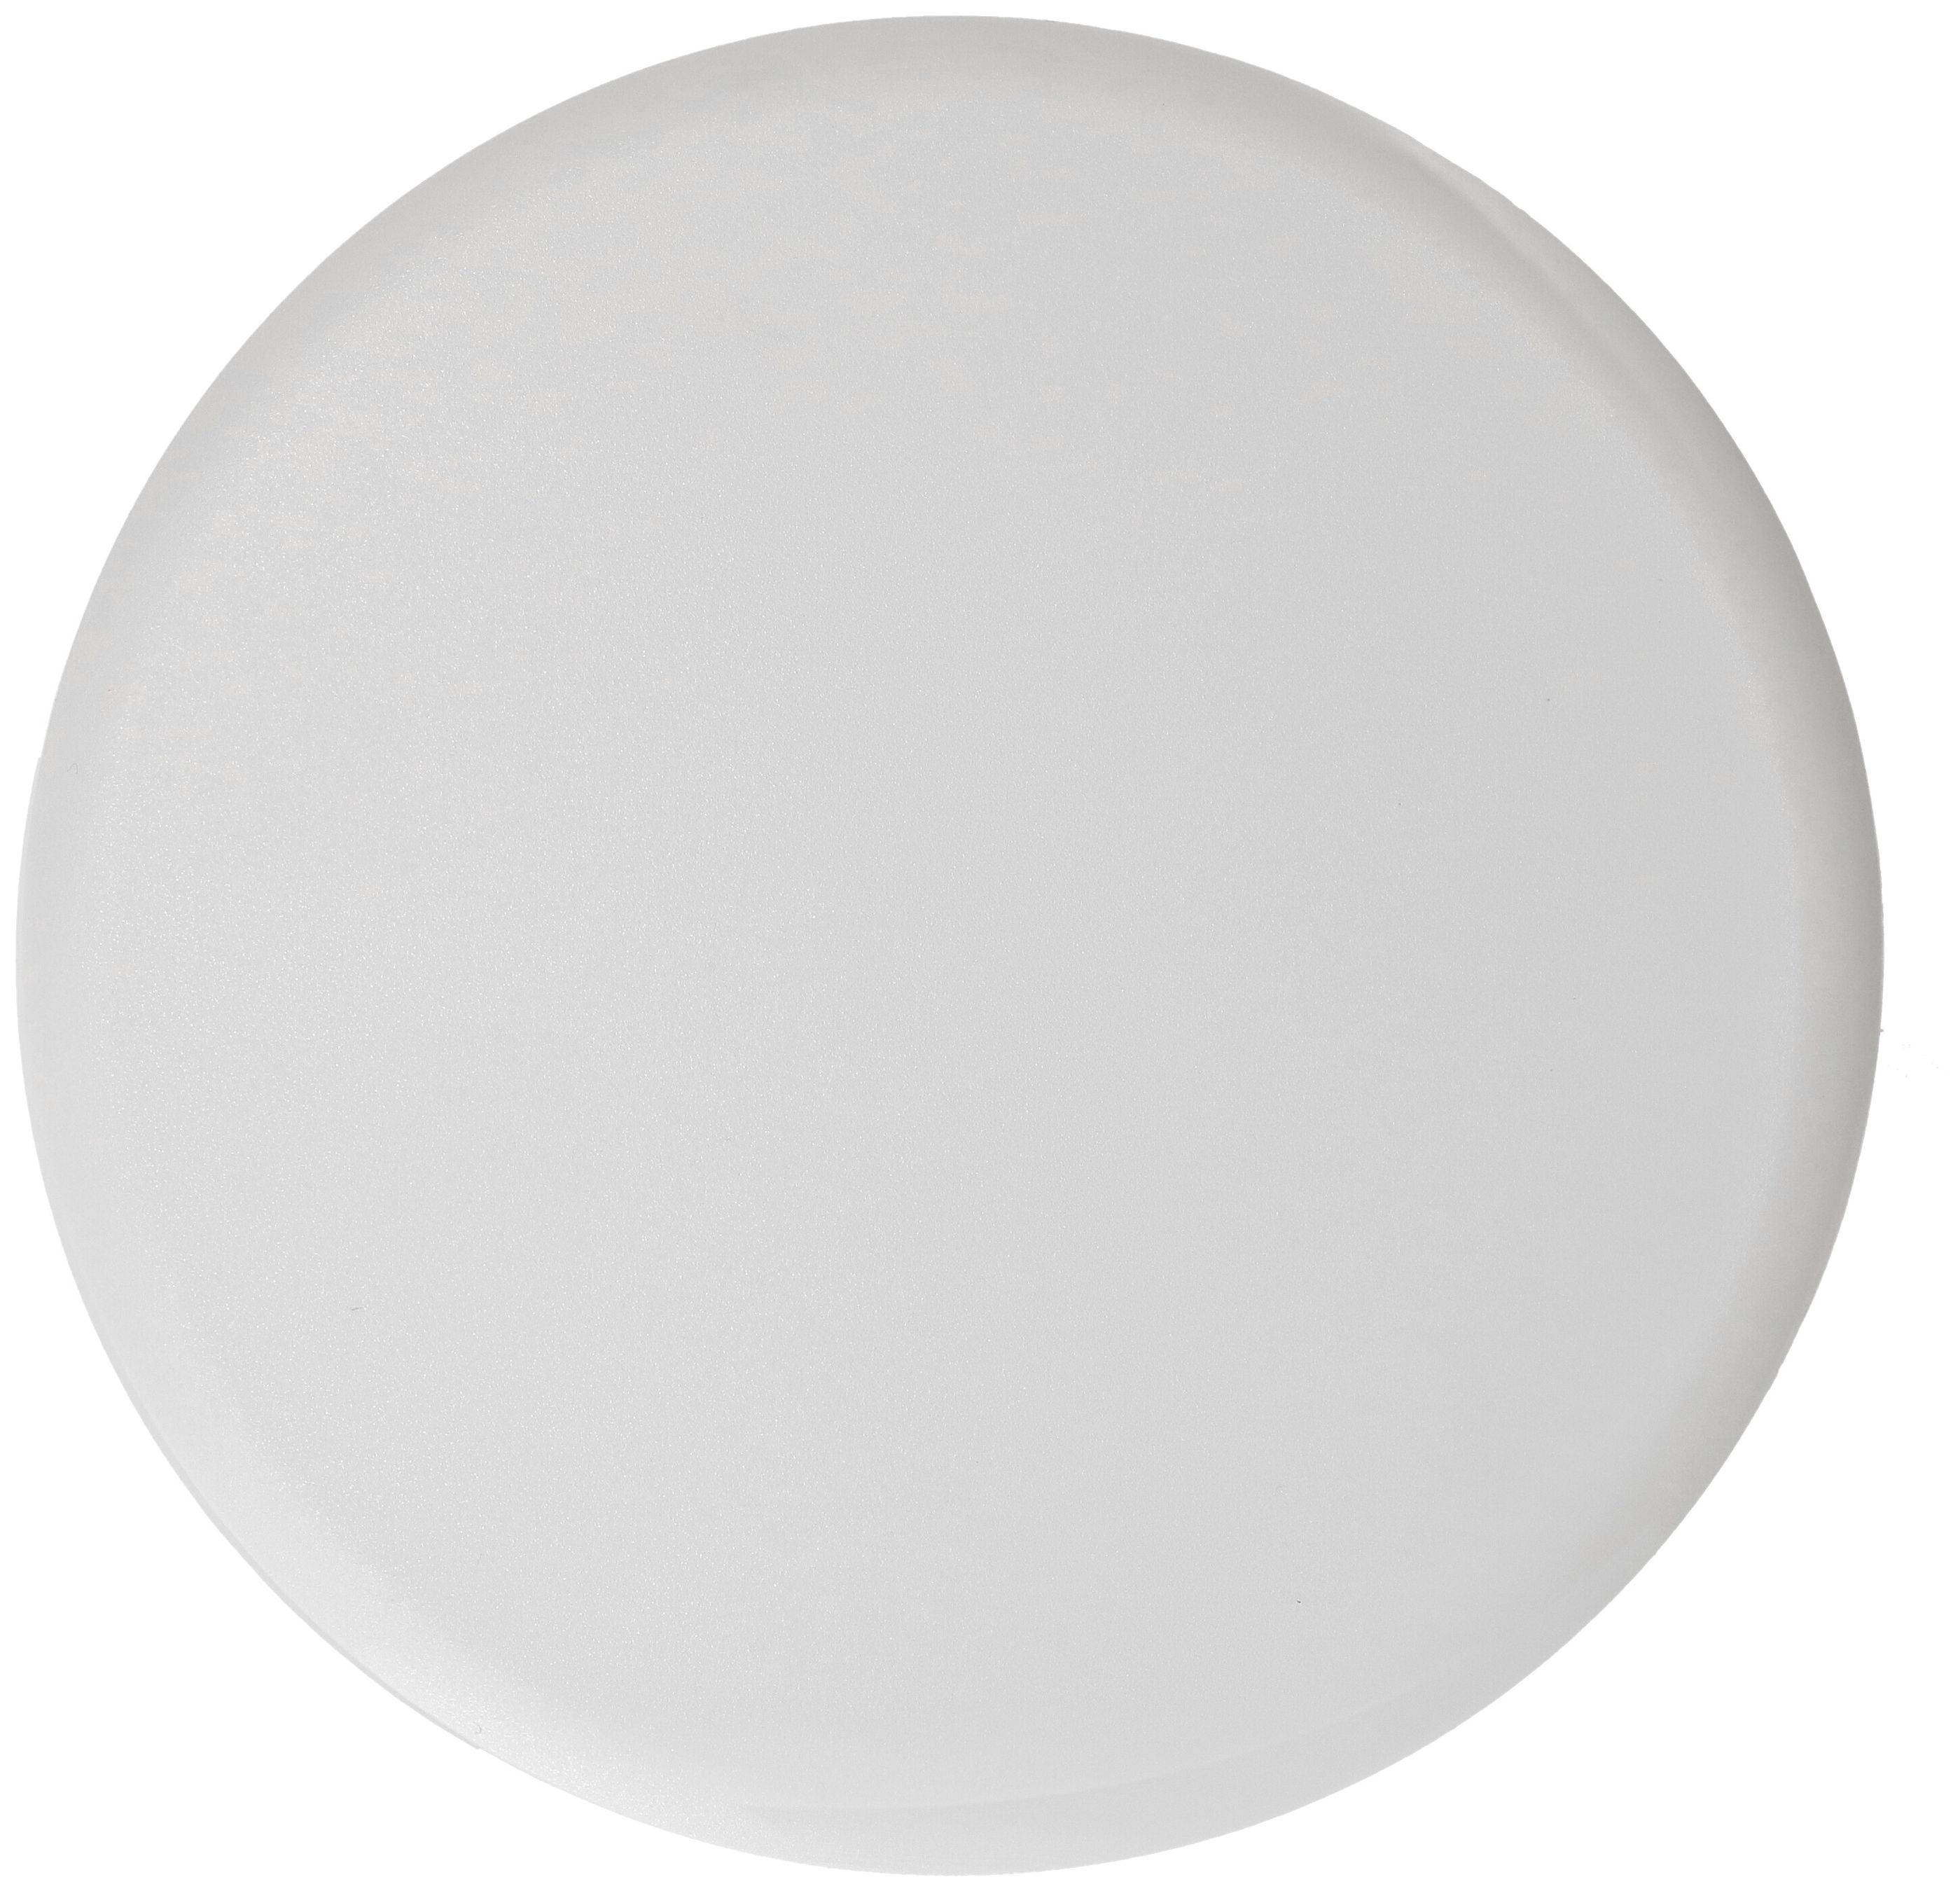 Ceiling cover flat light grey